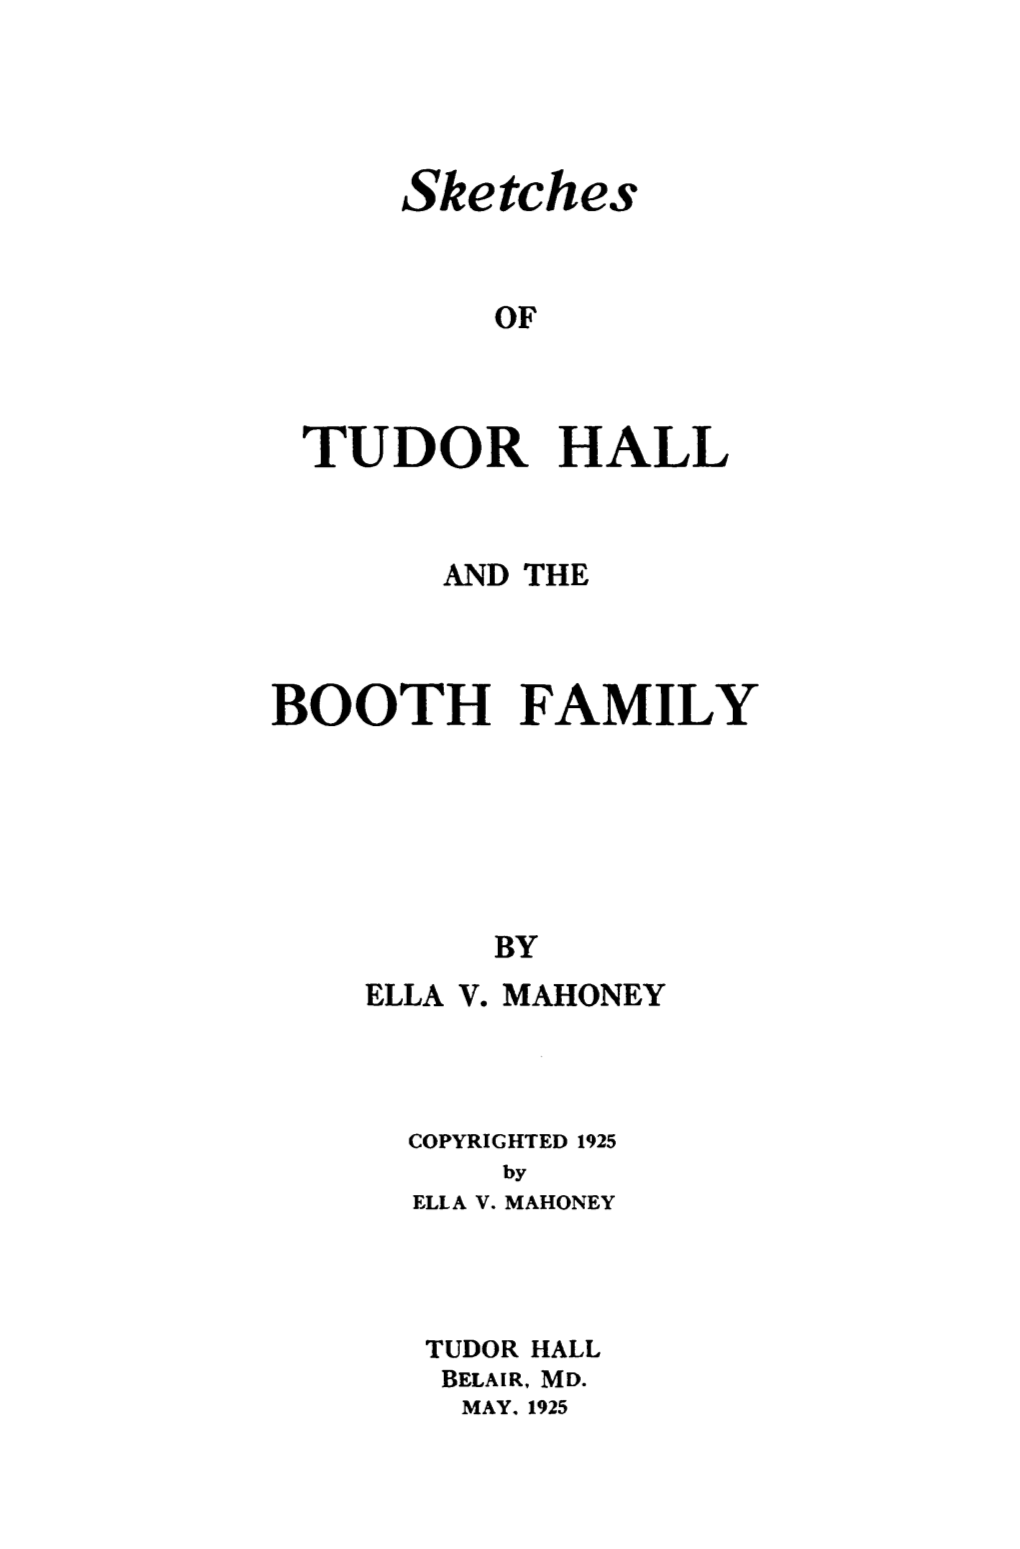 Sketches TUDOR HALL BOOTH FAMILY